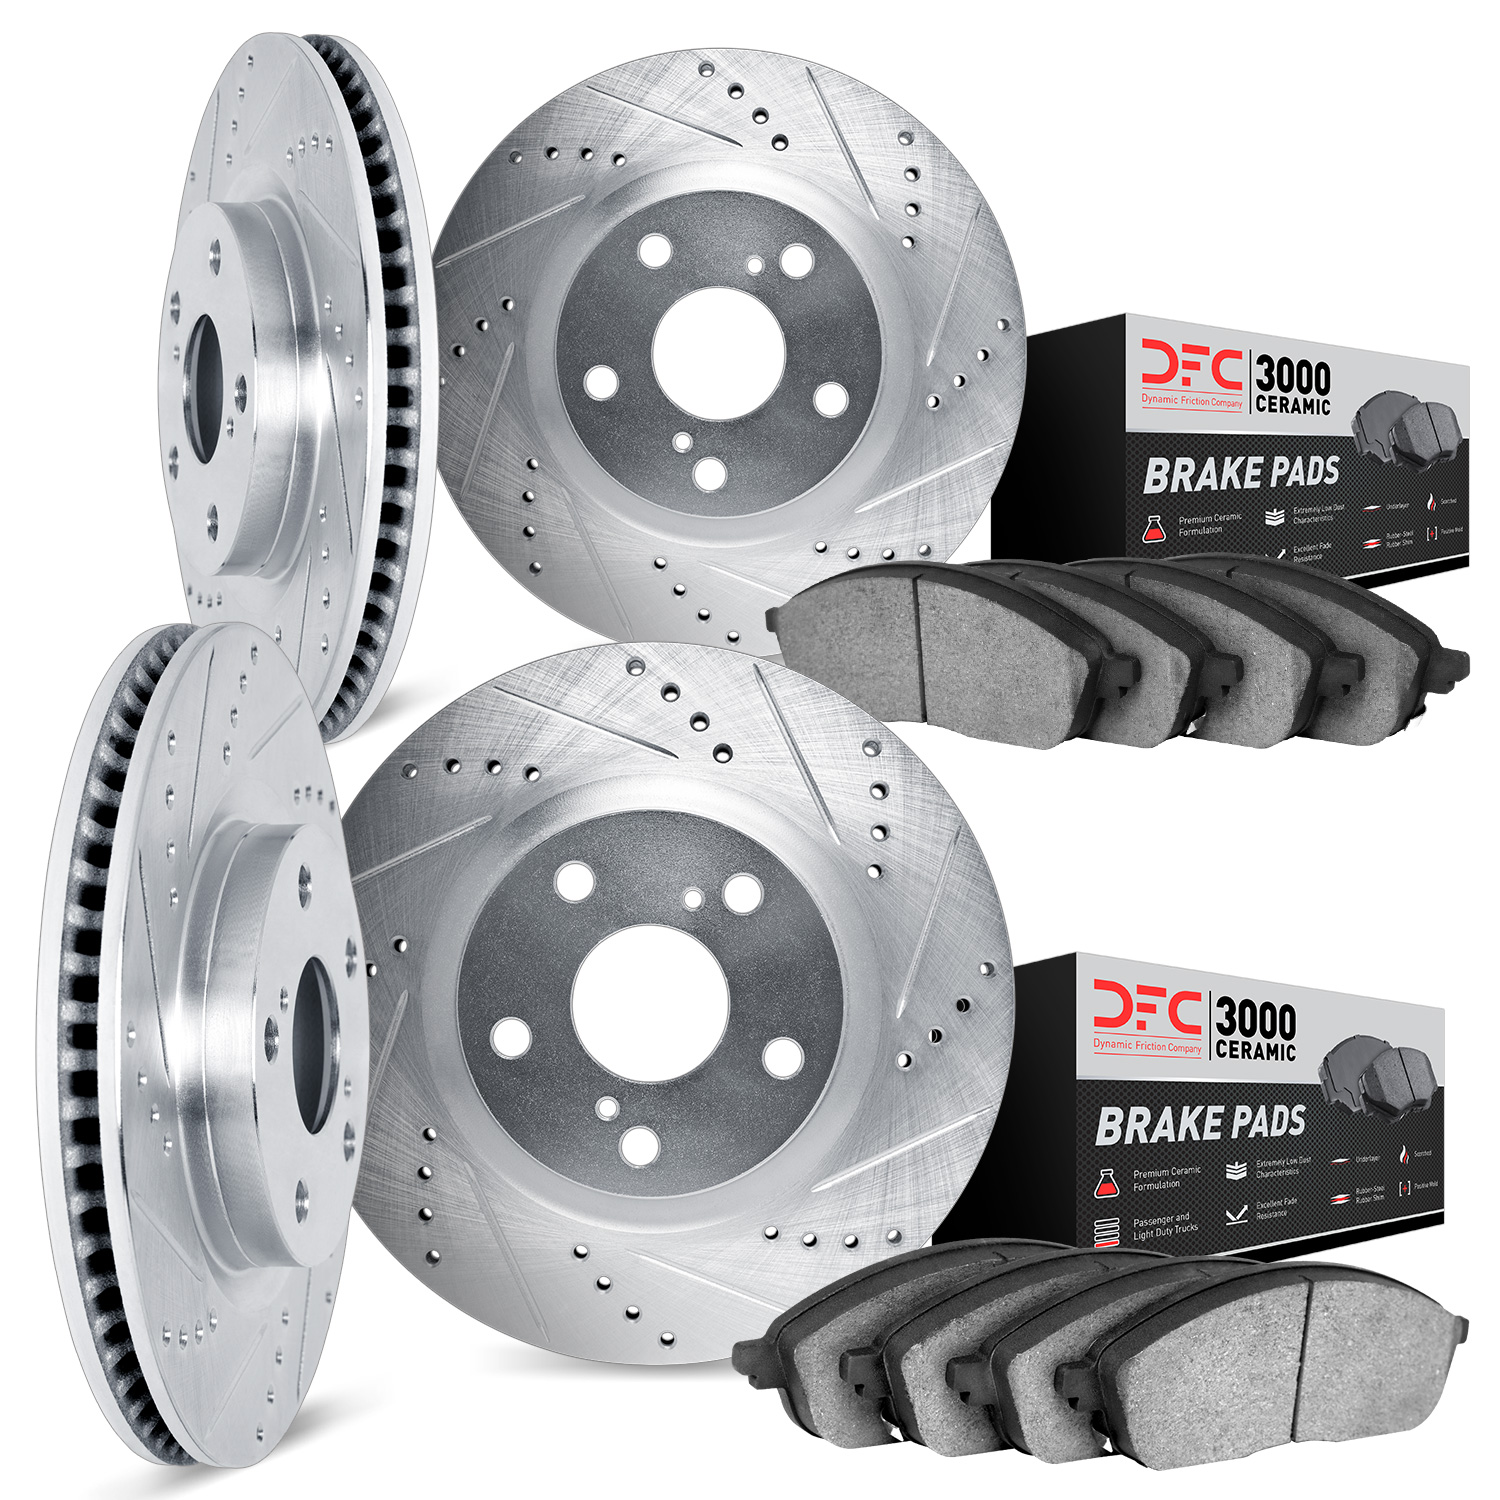 7304-75006 Drilled/Slotted Brake Rotor with 3000-Series Ceramic Brake Pads Kit [Silver], 1993-1997 Lexus/Toyota/Scion, Position: